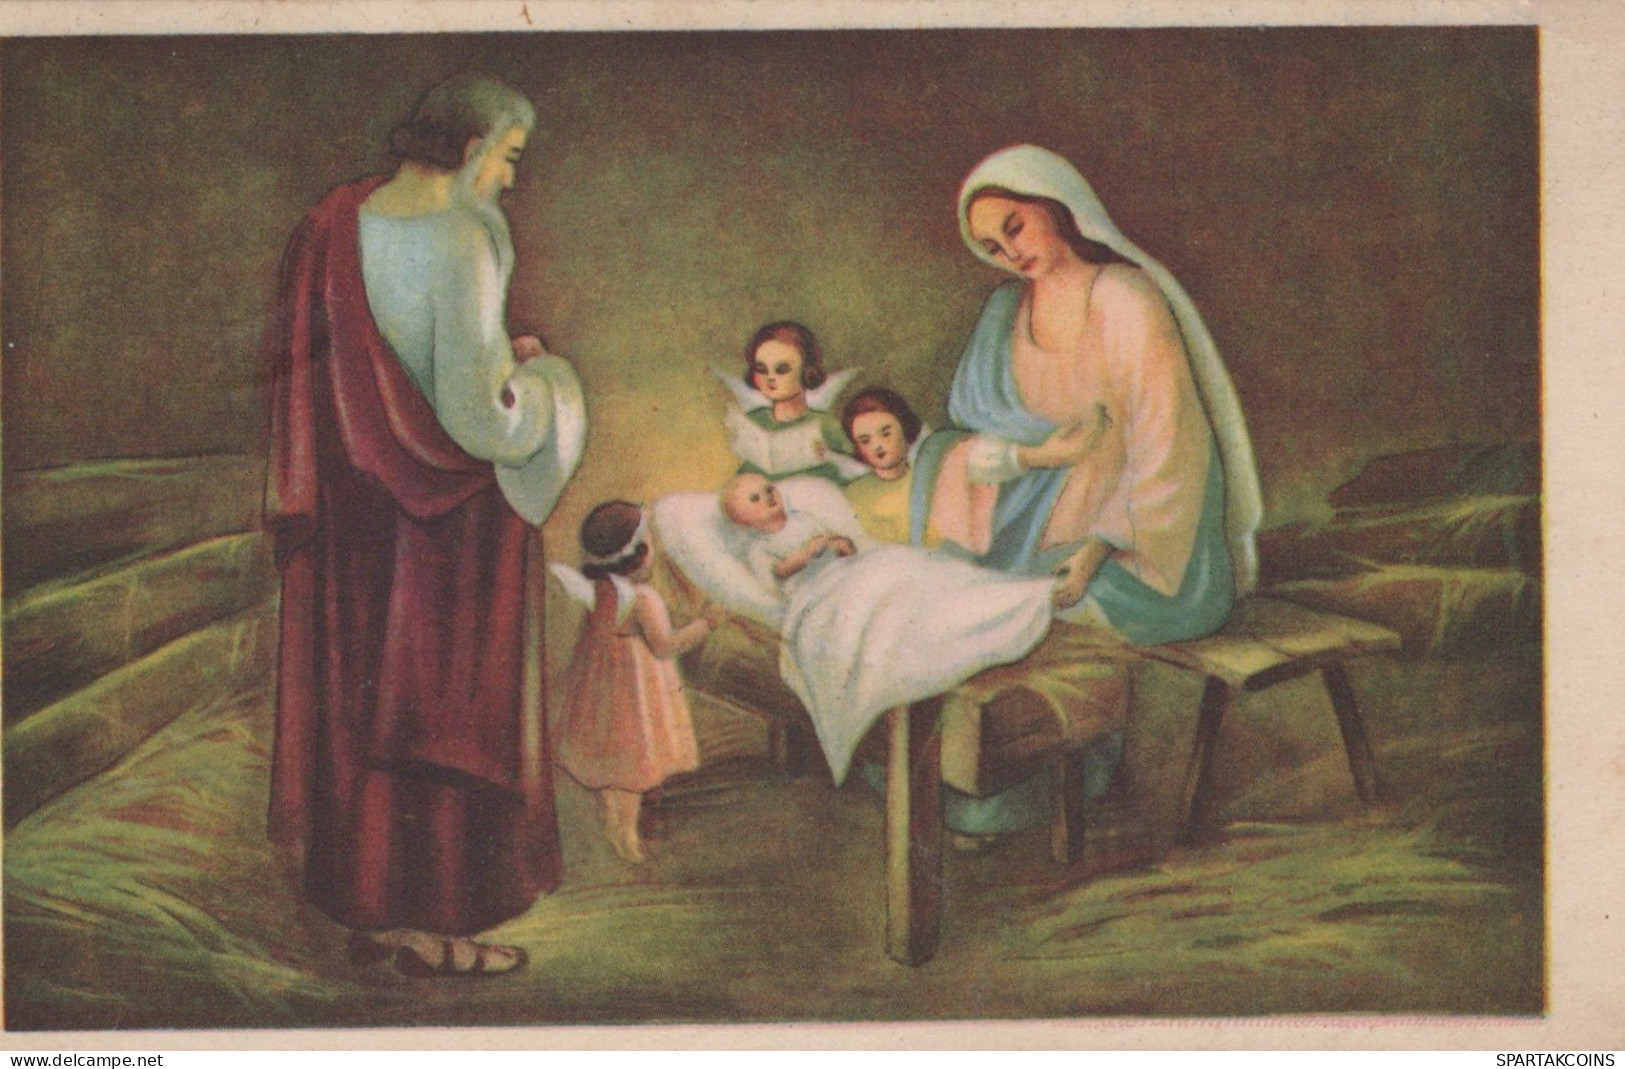 ANGELO Buon Anno Natale Vintage Cartolina CPA #PAG698.IT - Angels